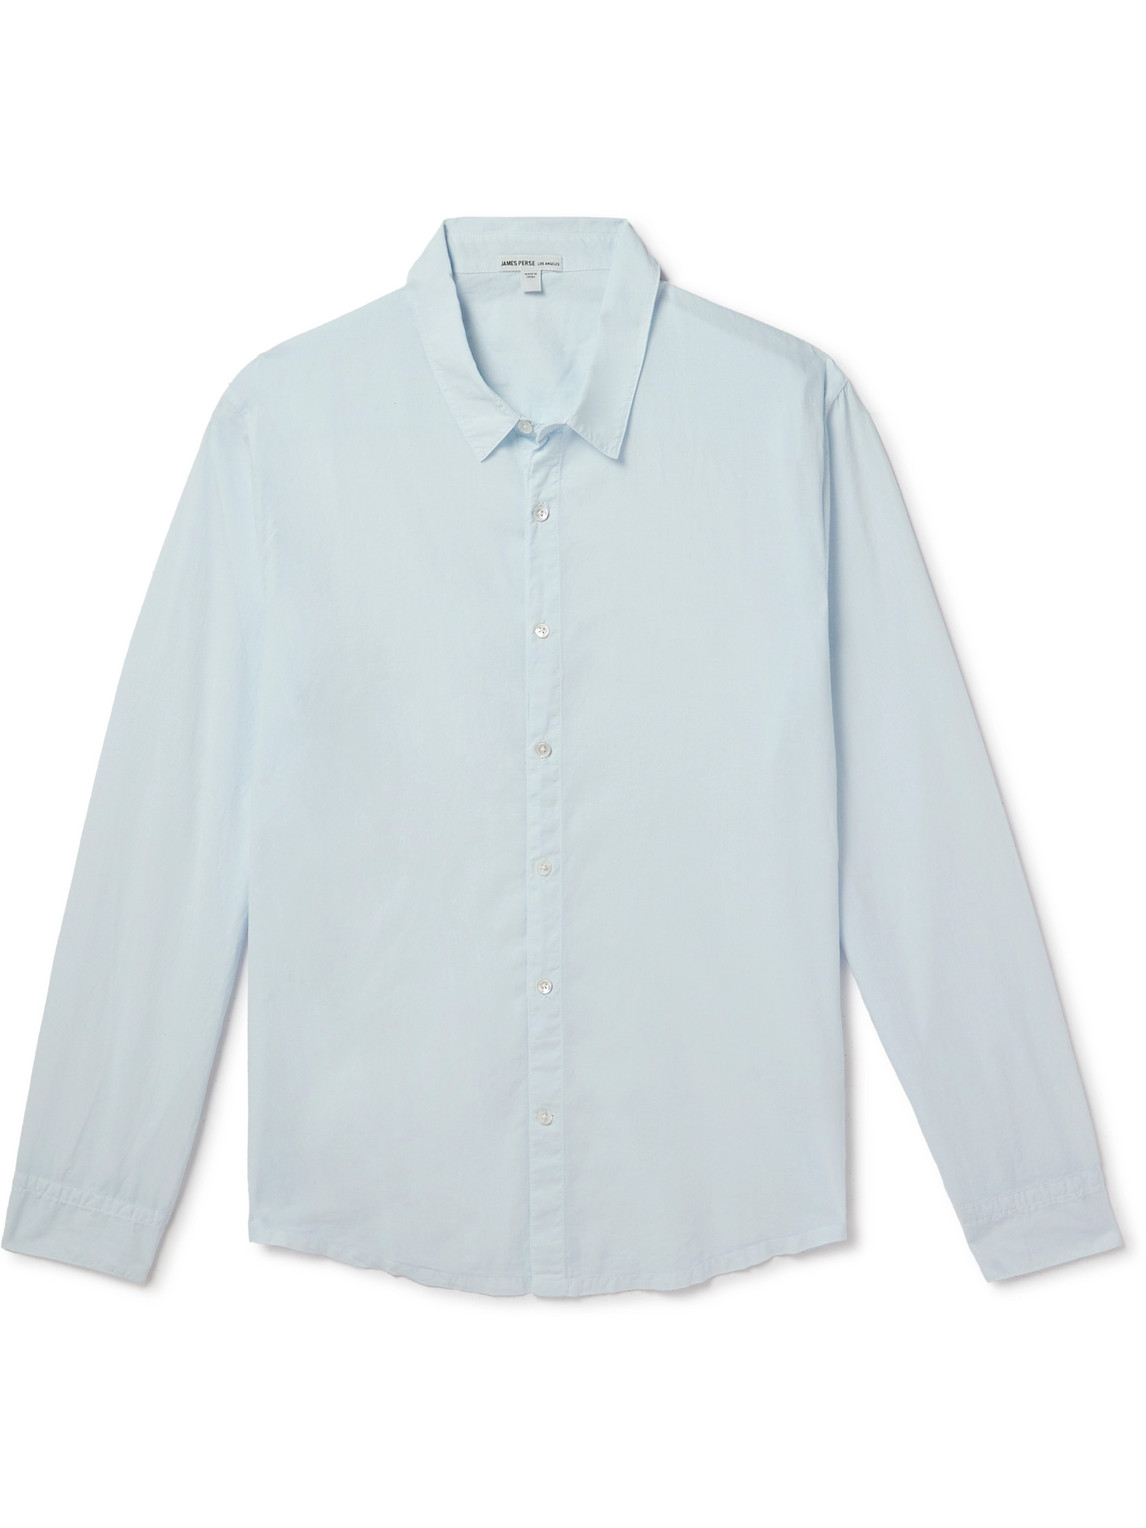 James Perse Standard Cotton Shirt In Blue